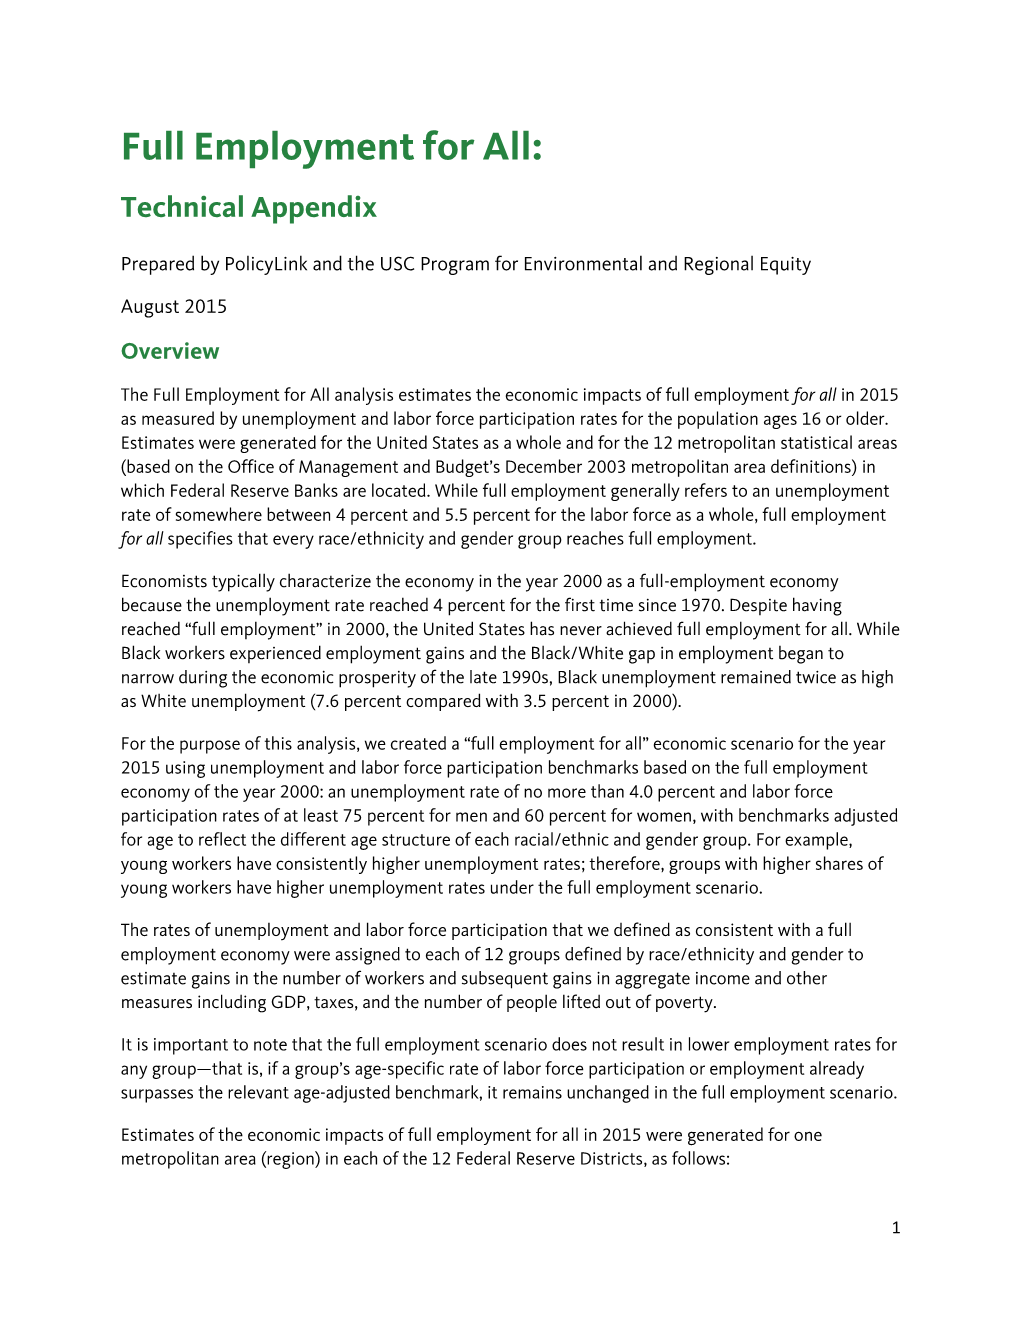 Full Employment for All: Technical Appendix